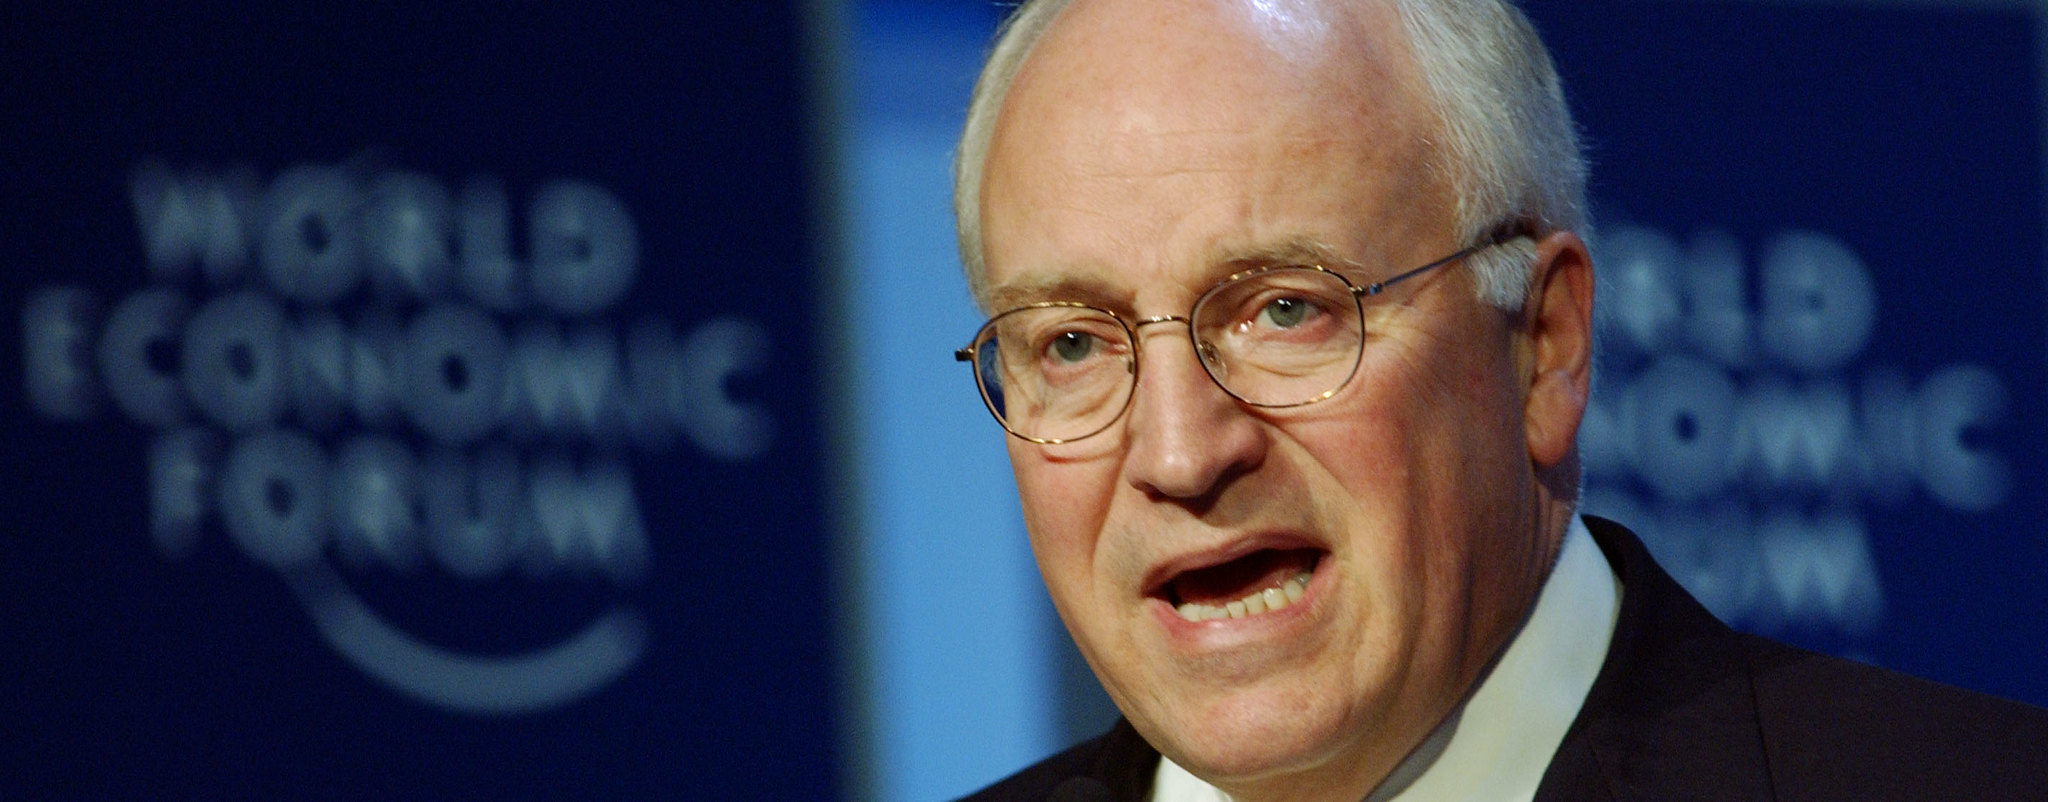 Dick cheney iran nuclear